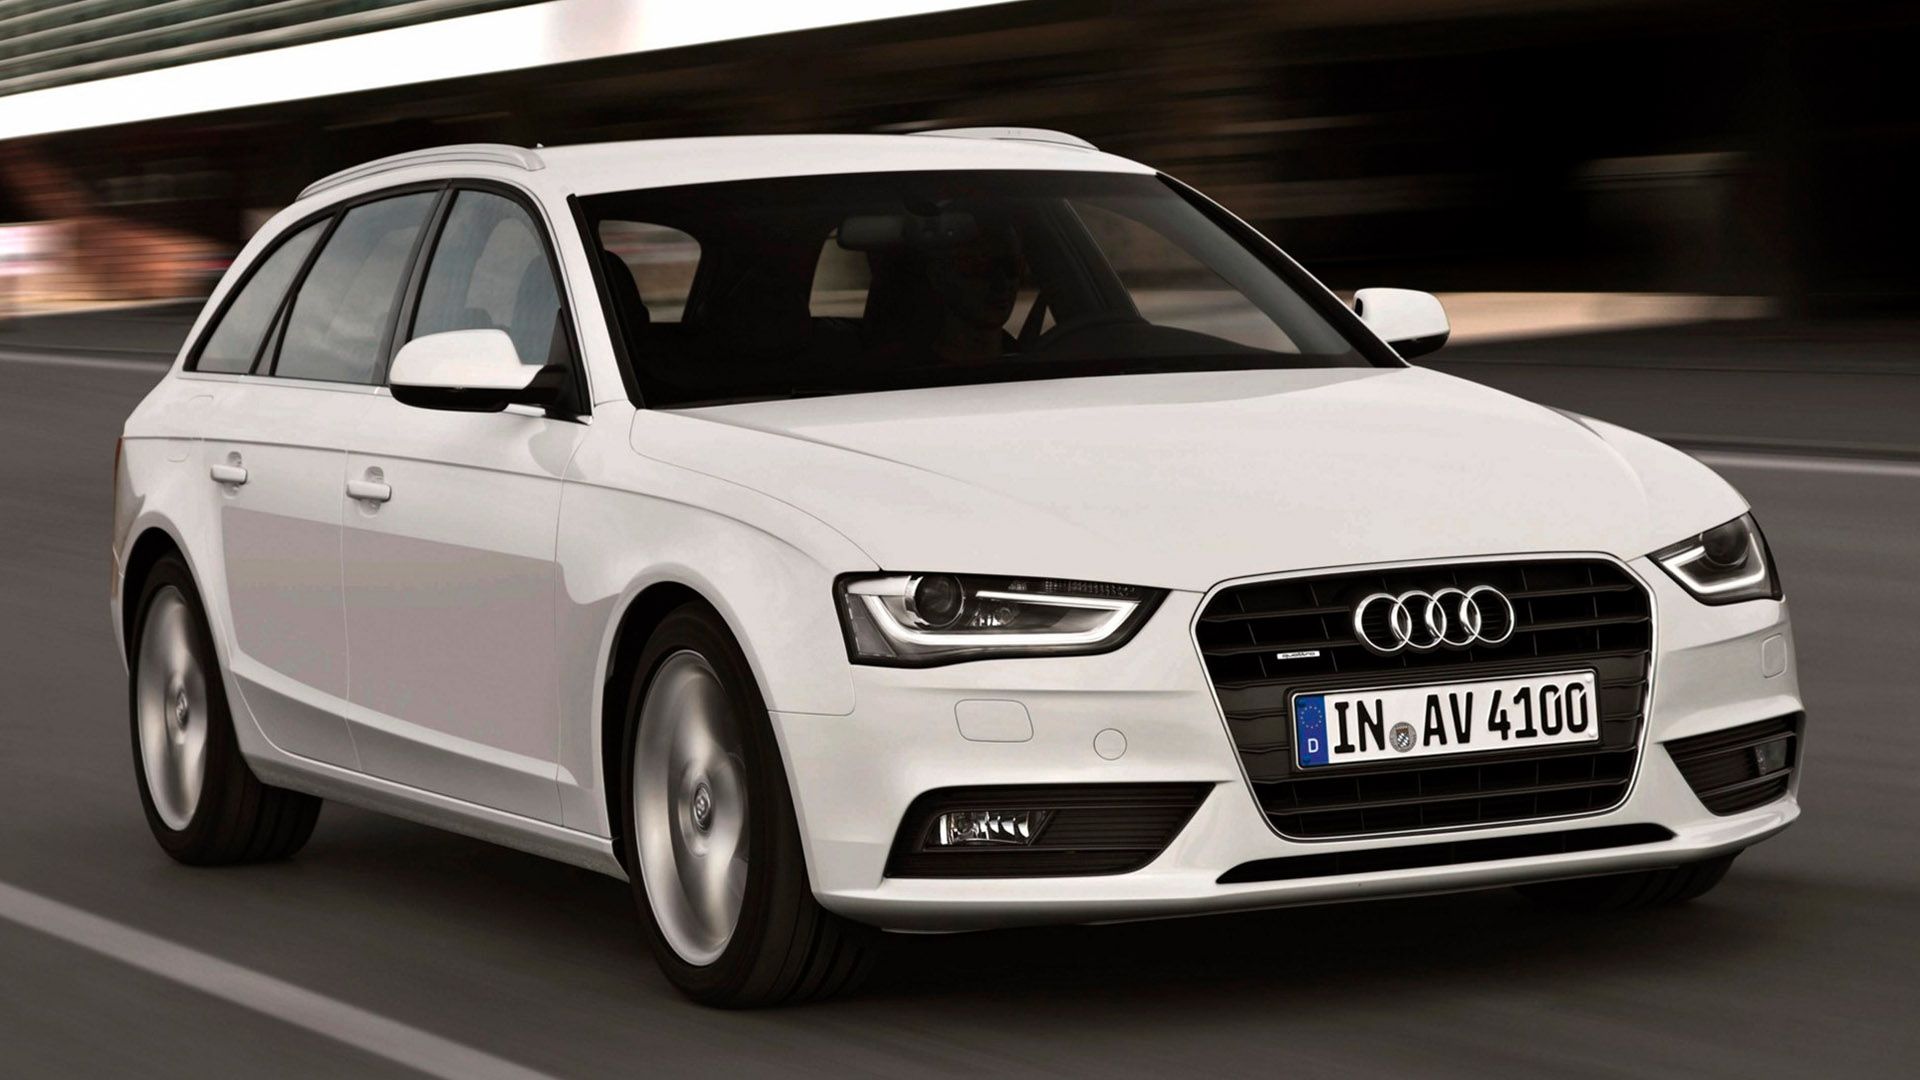 White Audi A4 Avant driving on a road